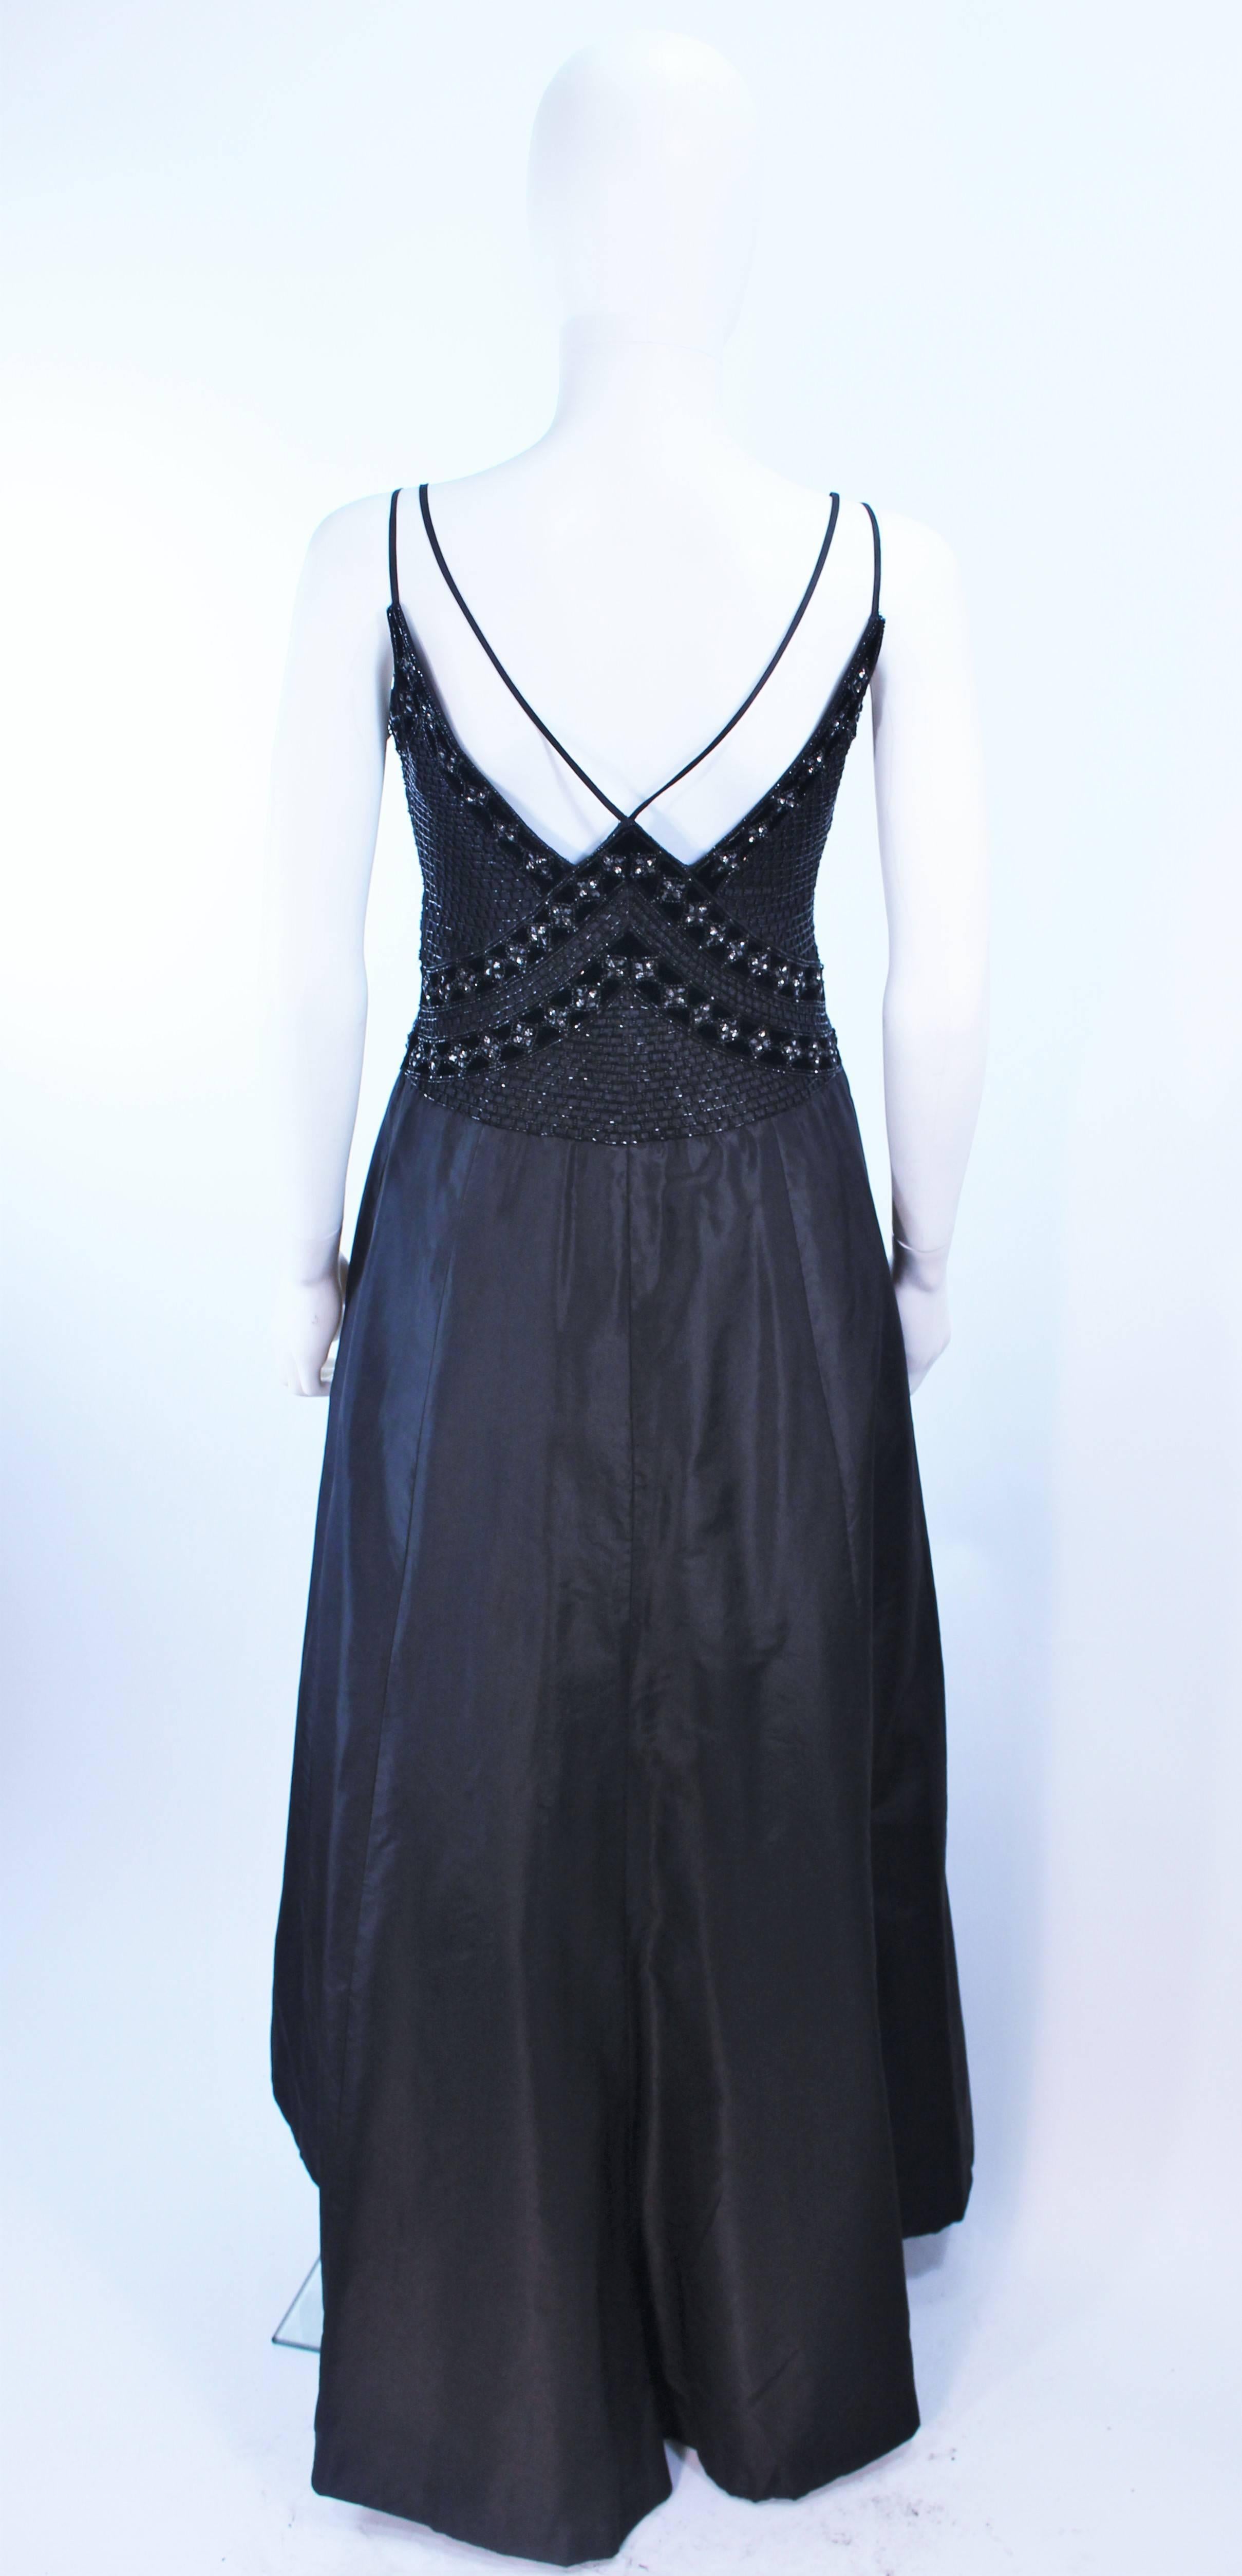 BADLEY MISCHKA Black Satin Beaded Gown with Rhinestone Accents Size 4 ...